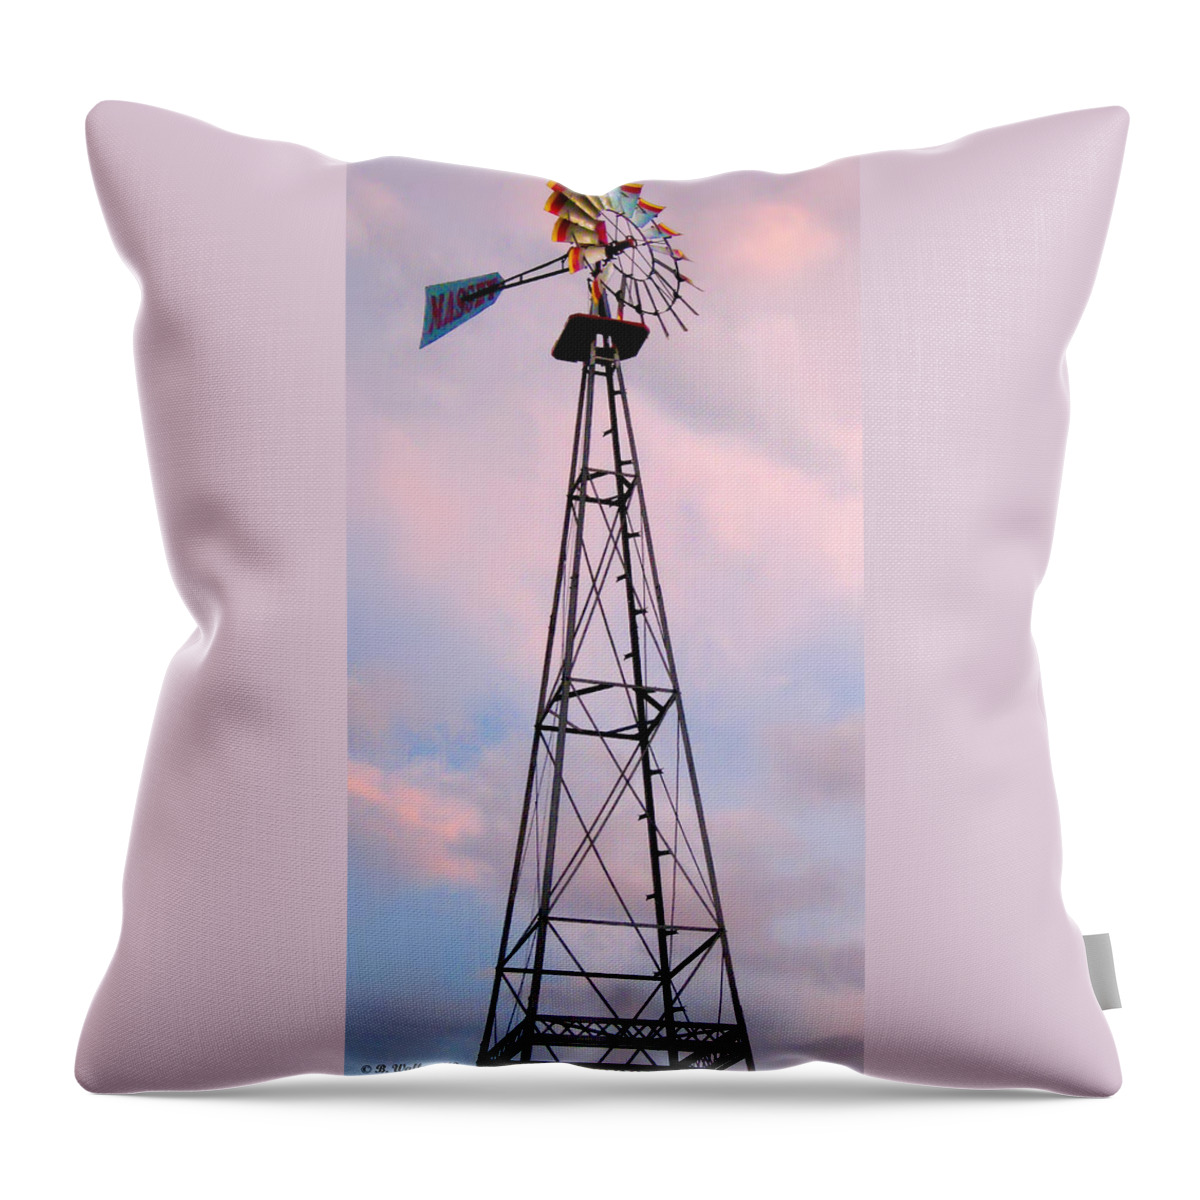 2d Throw Pillow featuring the photograph Windpump by Brian Wallace